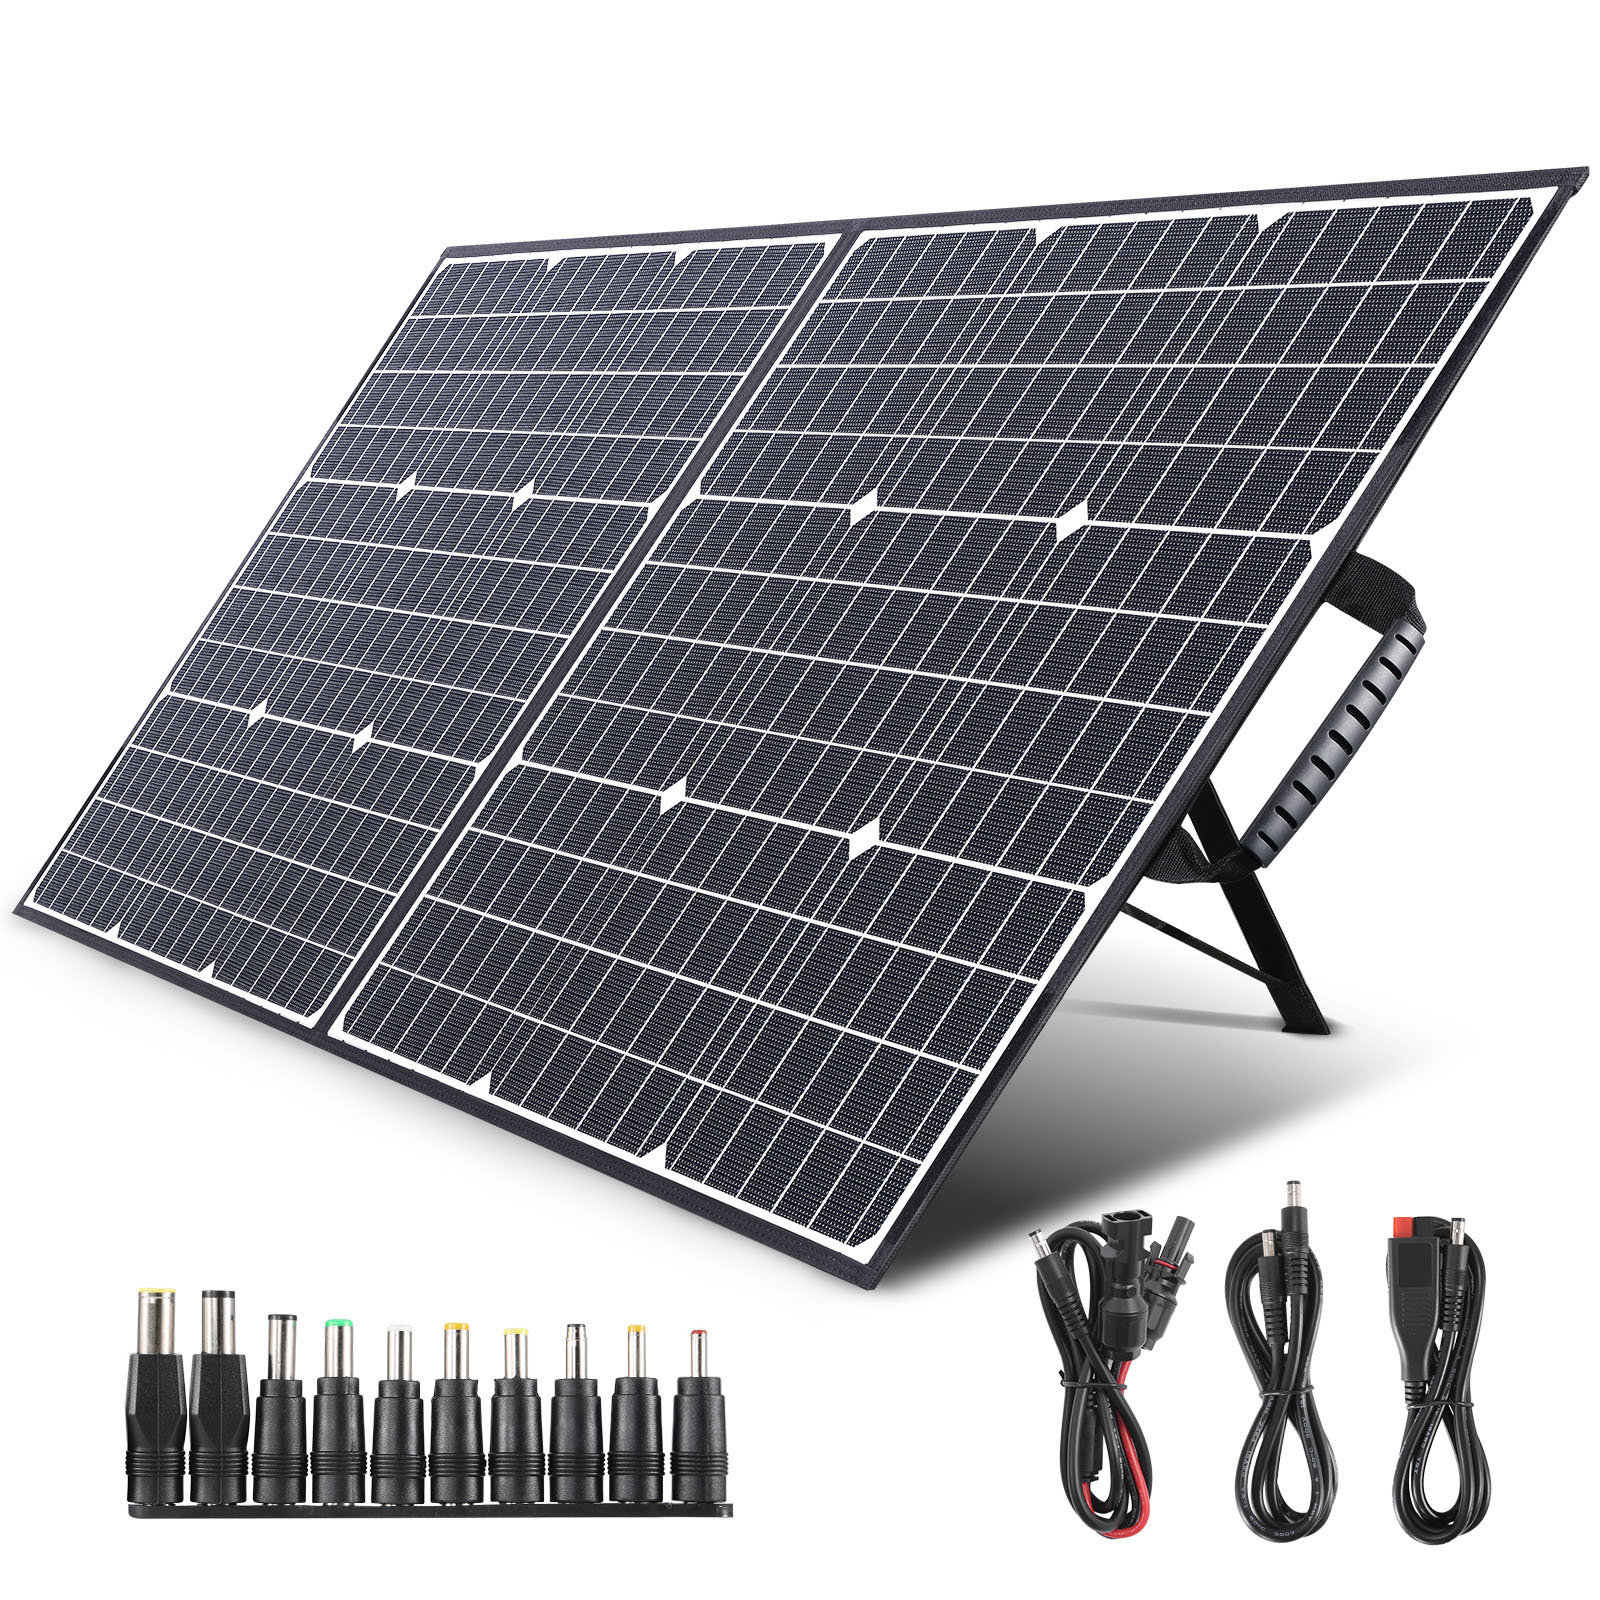 100W Portable Solar Panel Charger